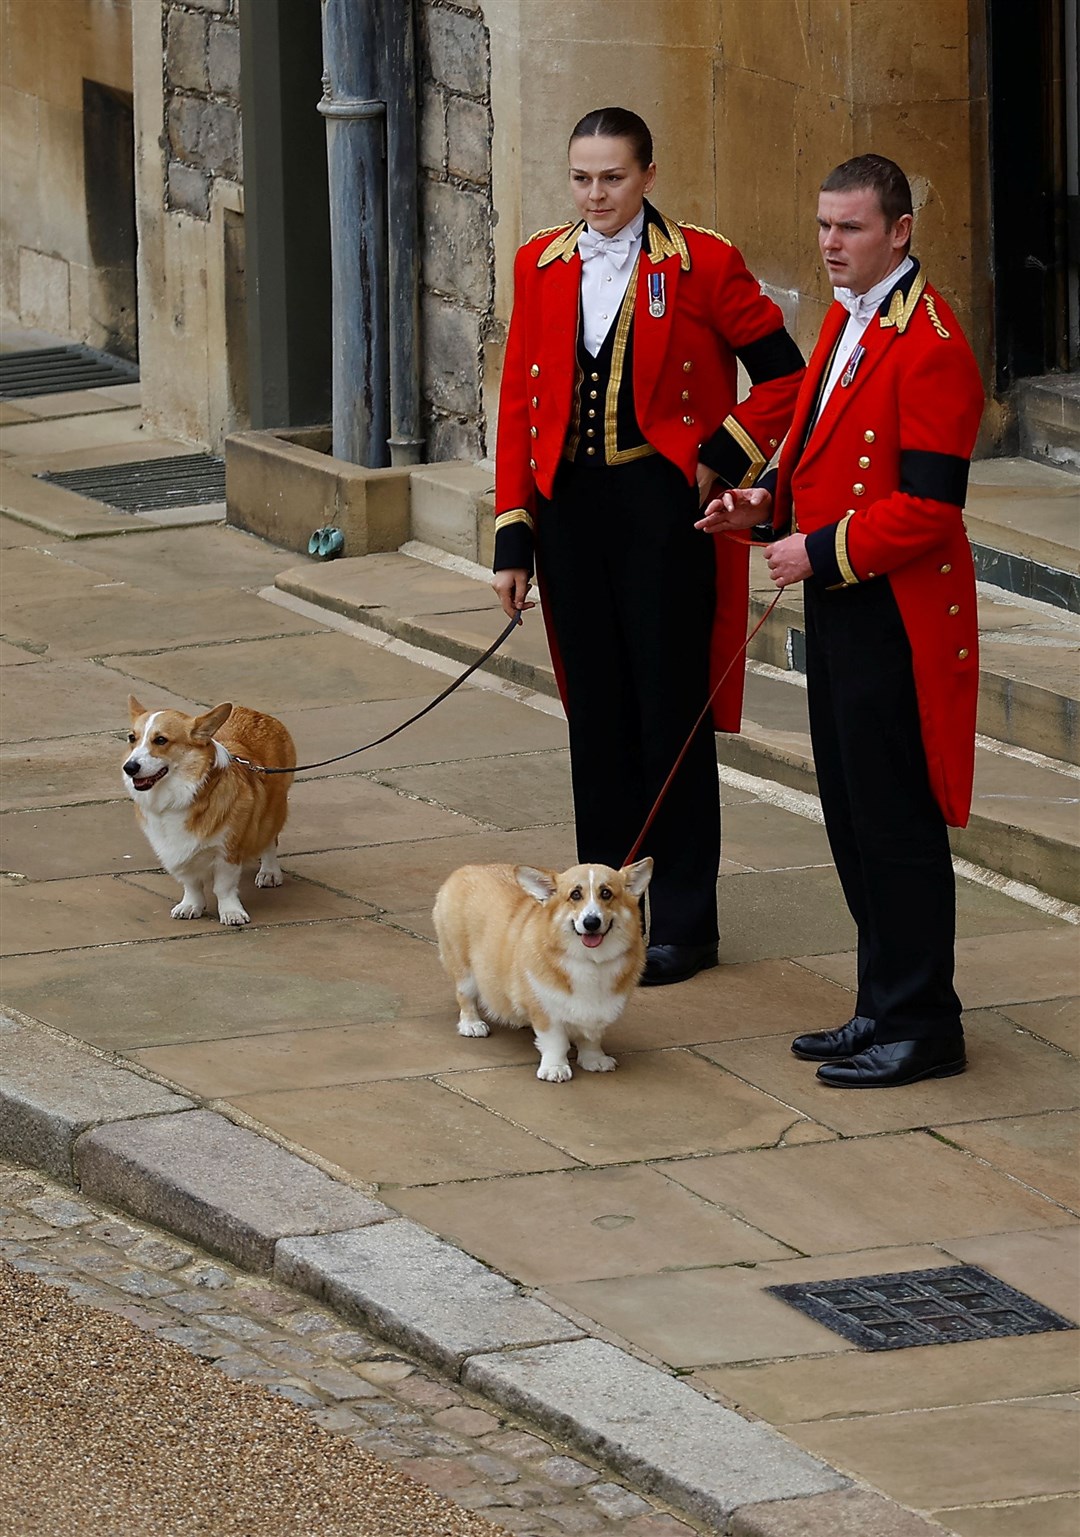 The Queen’s corgis, Muick and Sandy, welcomed her coffin to Windsor Castle (Peter Nicholls/PA)